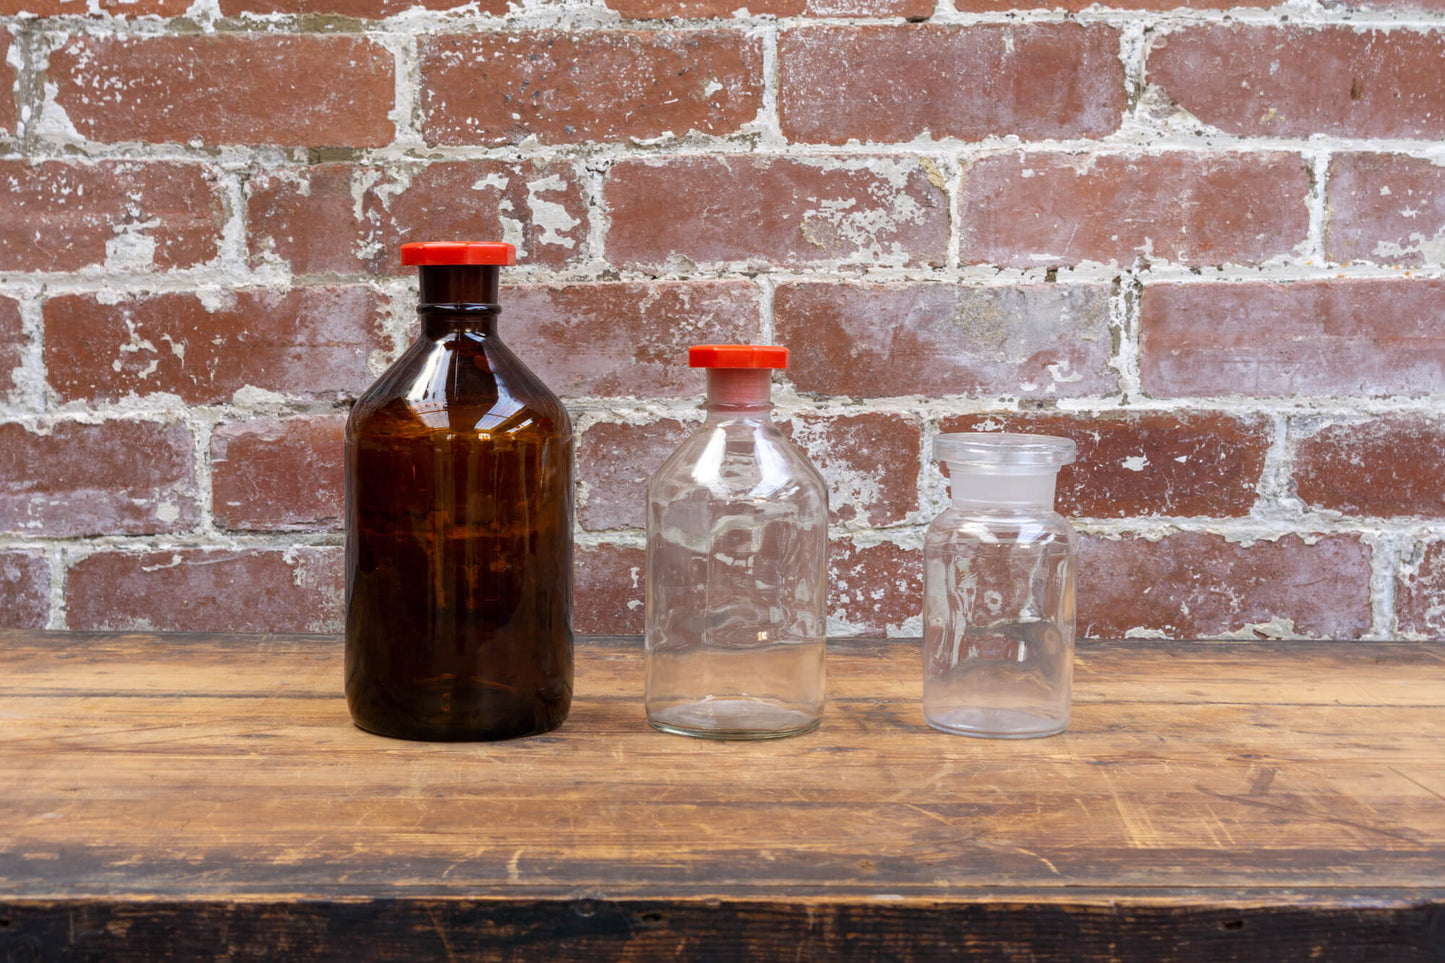 Photo shows a selection of vintage apothecary style glass science bottles atop a wood table. The background is a red rustic brick wall.